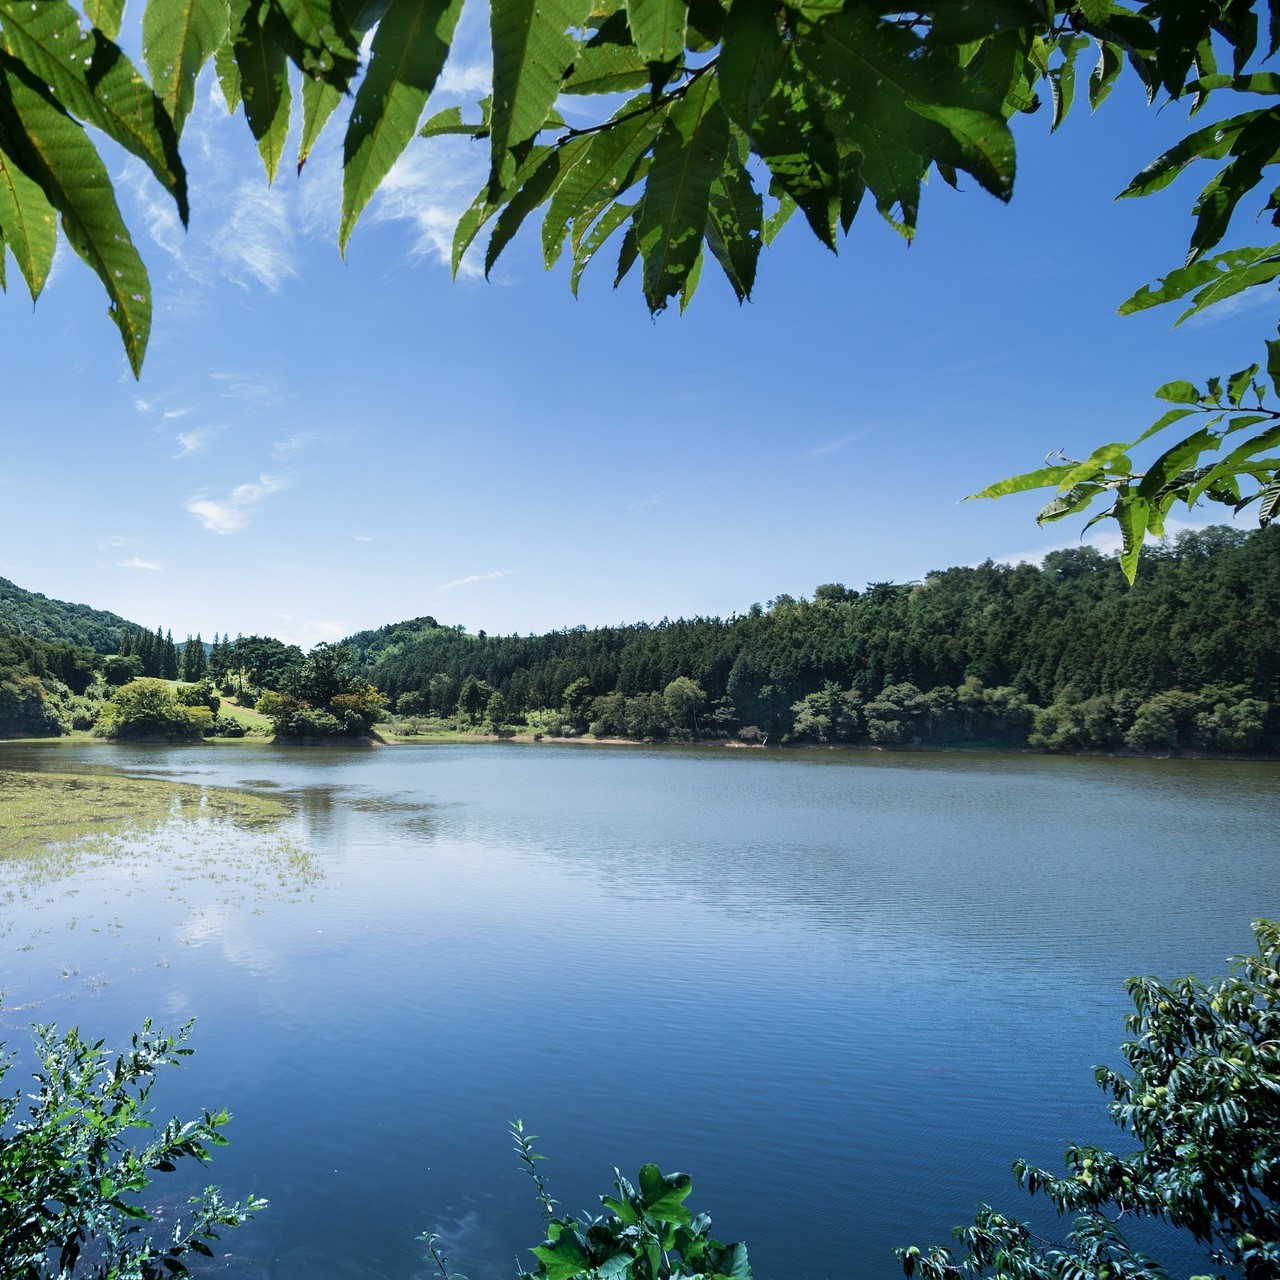 A blue lake with trees visible in the distance. The sky is blue and the image is framed by leaves.